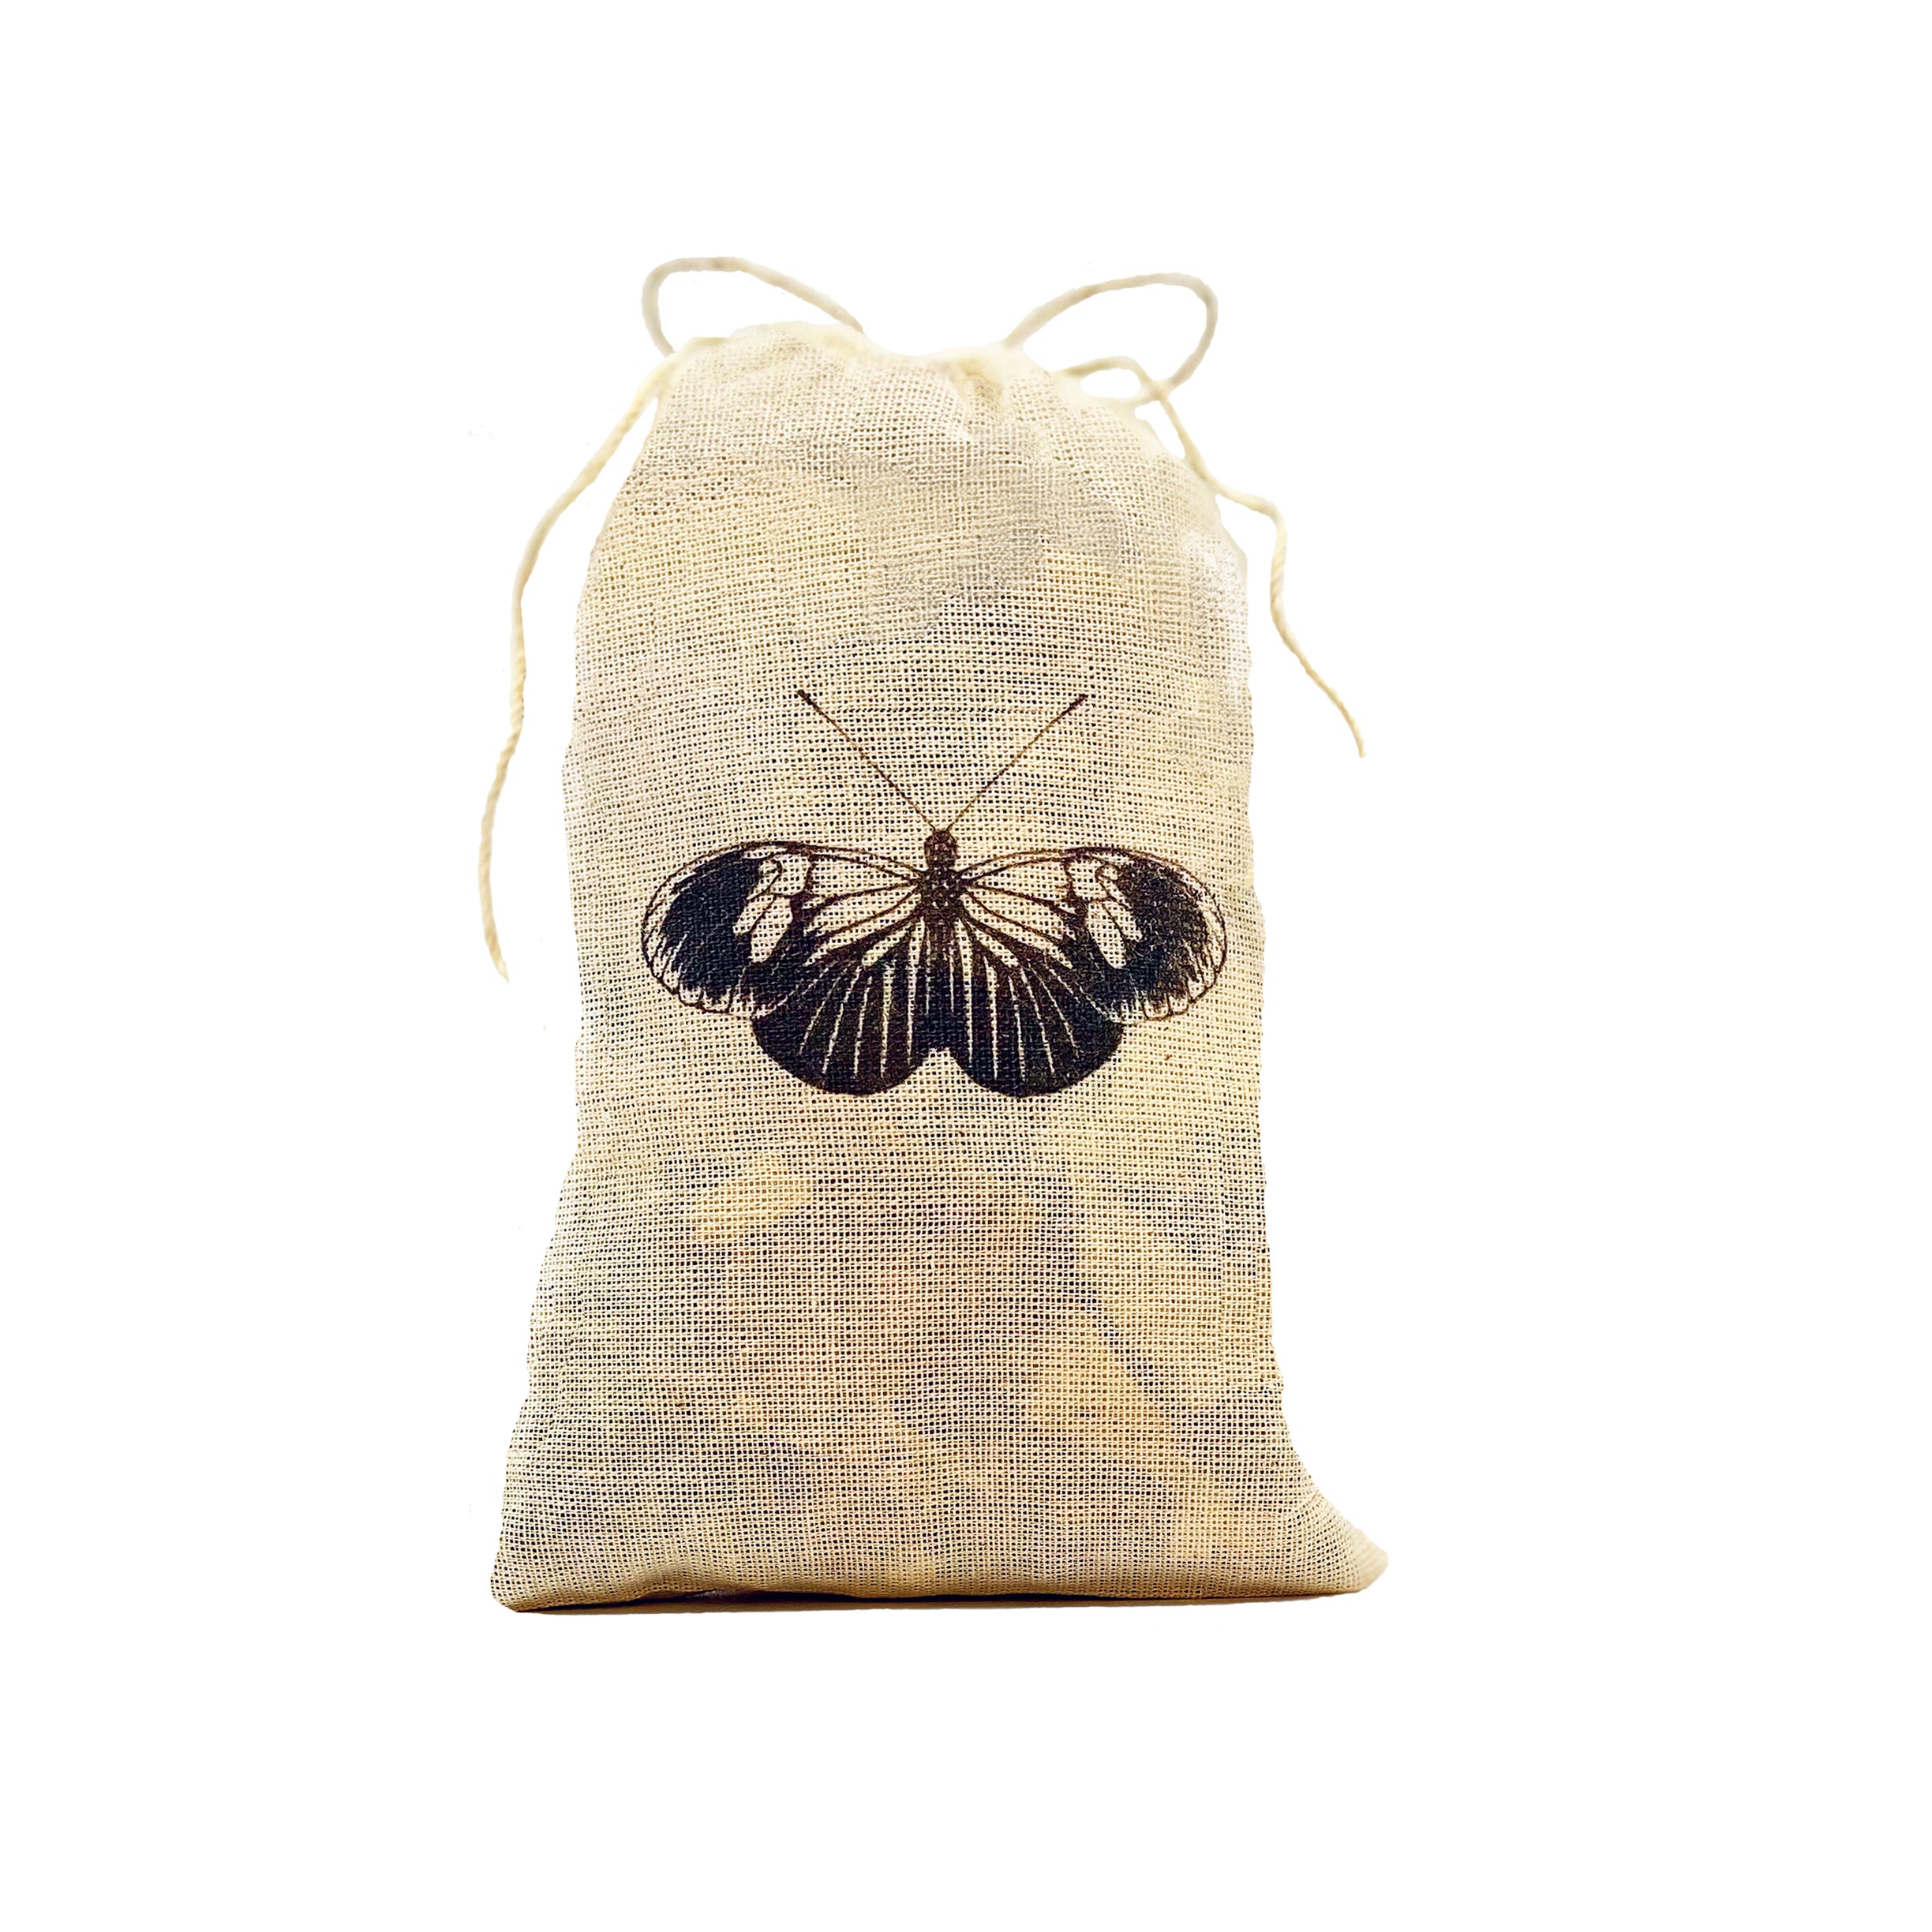 How to make all-natural moth repellent sachets